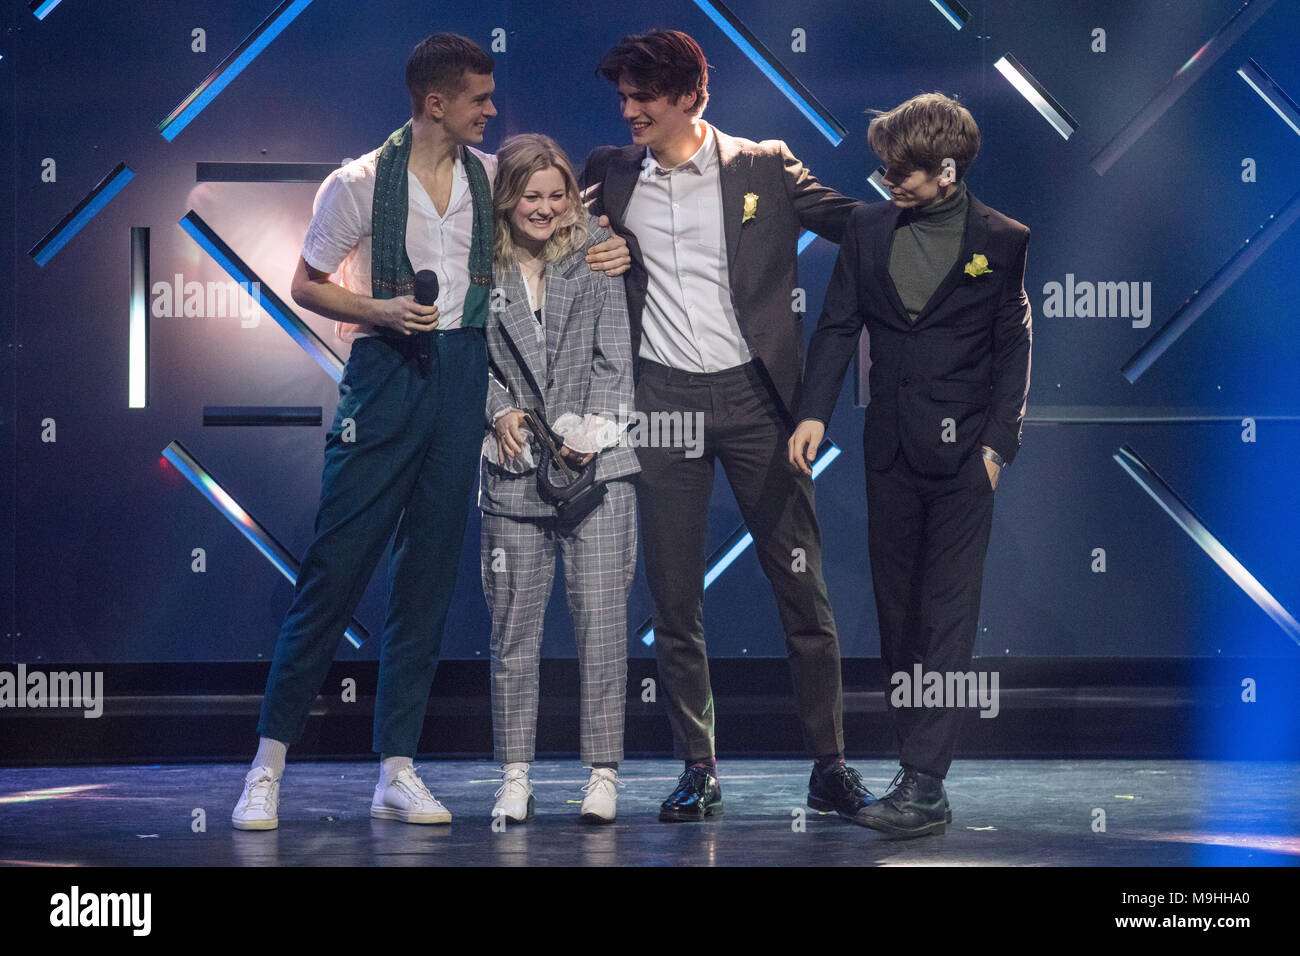 Norway, Oslo - February 25, 2018. The Norwegian pop-rock band Sløtface receives the award for Best Rock during the Norwegian Grammy Awards, Spellemannprisen 2017, at Oslo Konserthus in Oslo. (Photo credit: Gonzales Photo - Stian S. Moller). Stock Photo